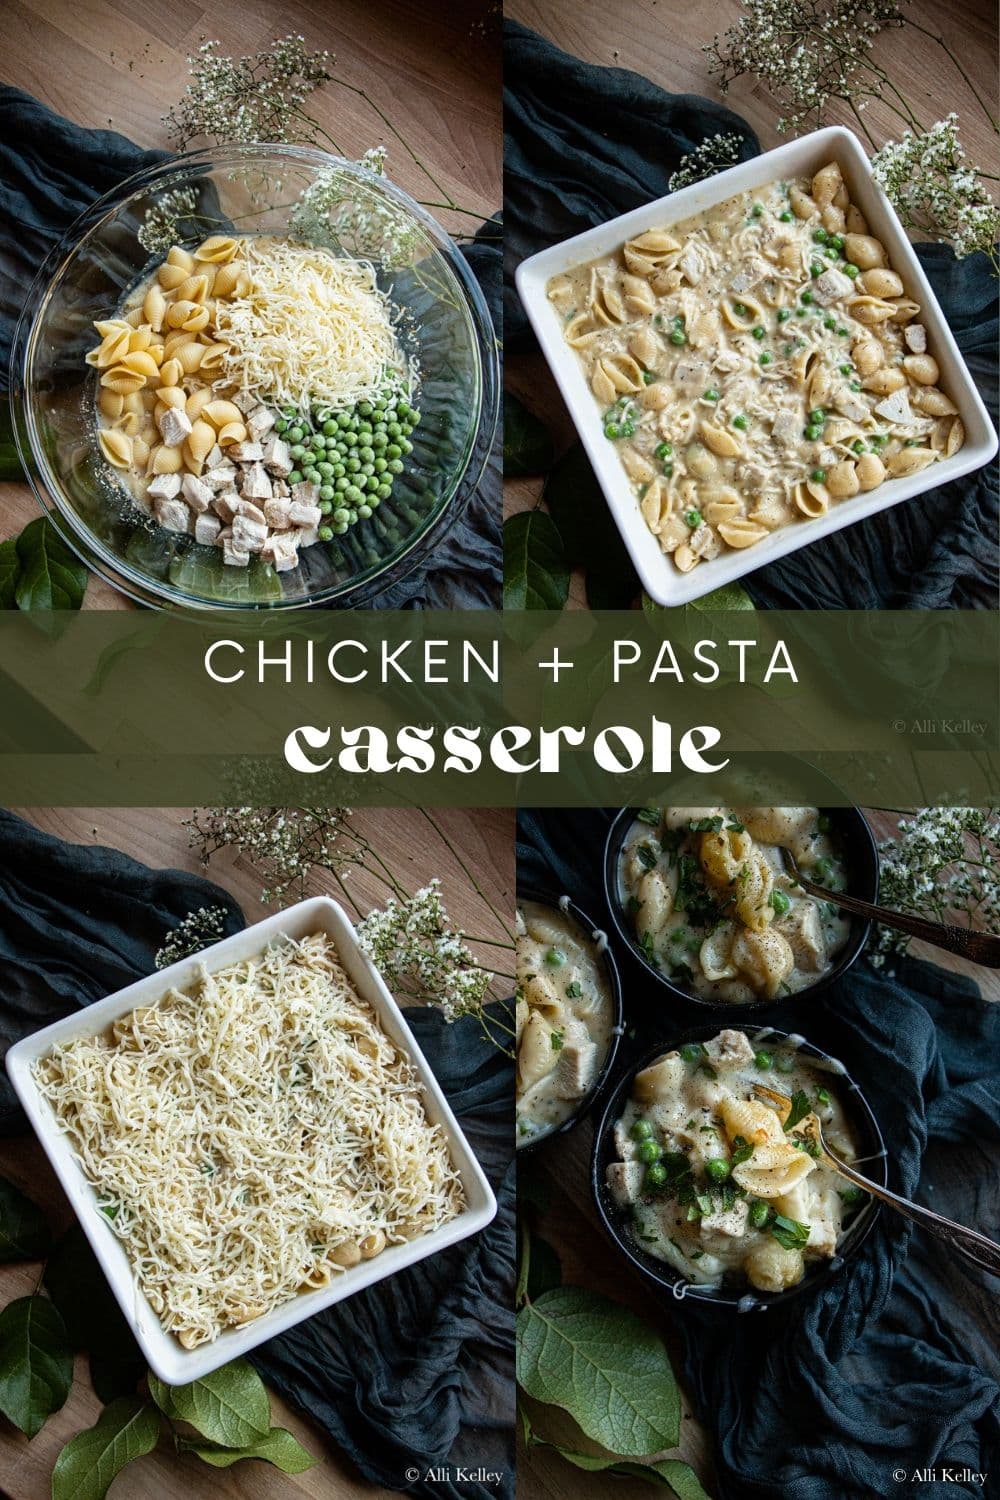 Creamy, cheesy chicken pasta casserole is one of those comforting dishes everyone will love. It's easy to make, requires minimal ingredients, and packs tons of flavor! This dish perfectly combines protein-packed chicken and hearty pasta in a creamy sauce - ideal for a cozy weeknight dinner.